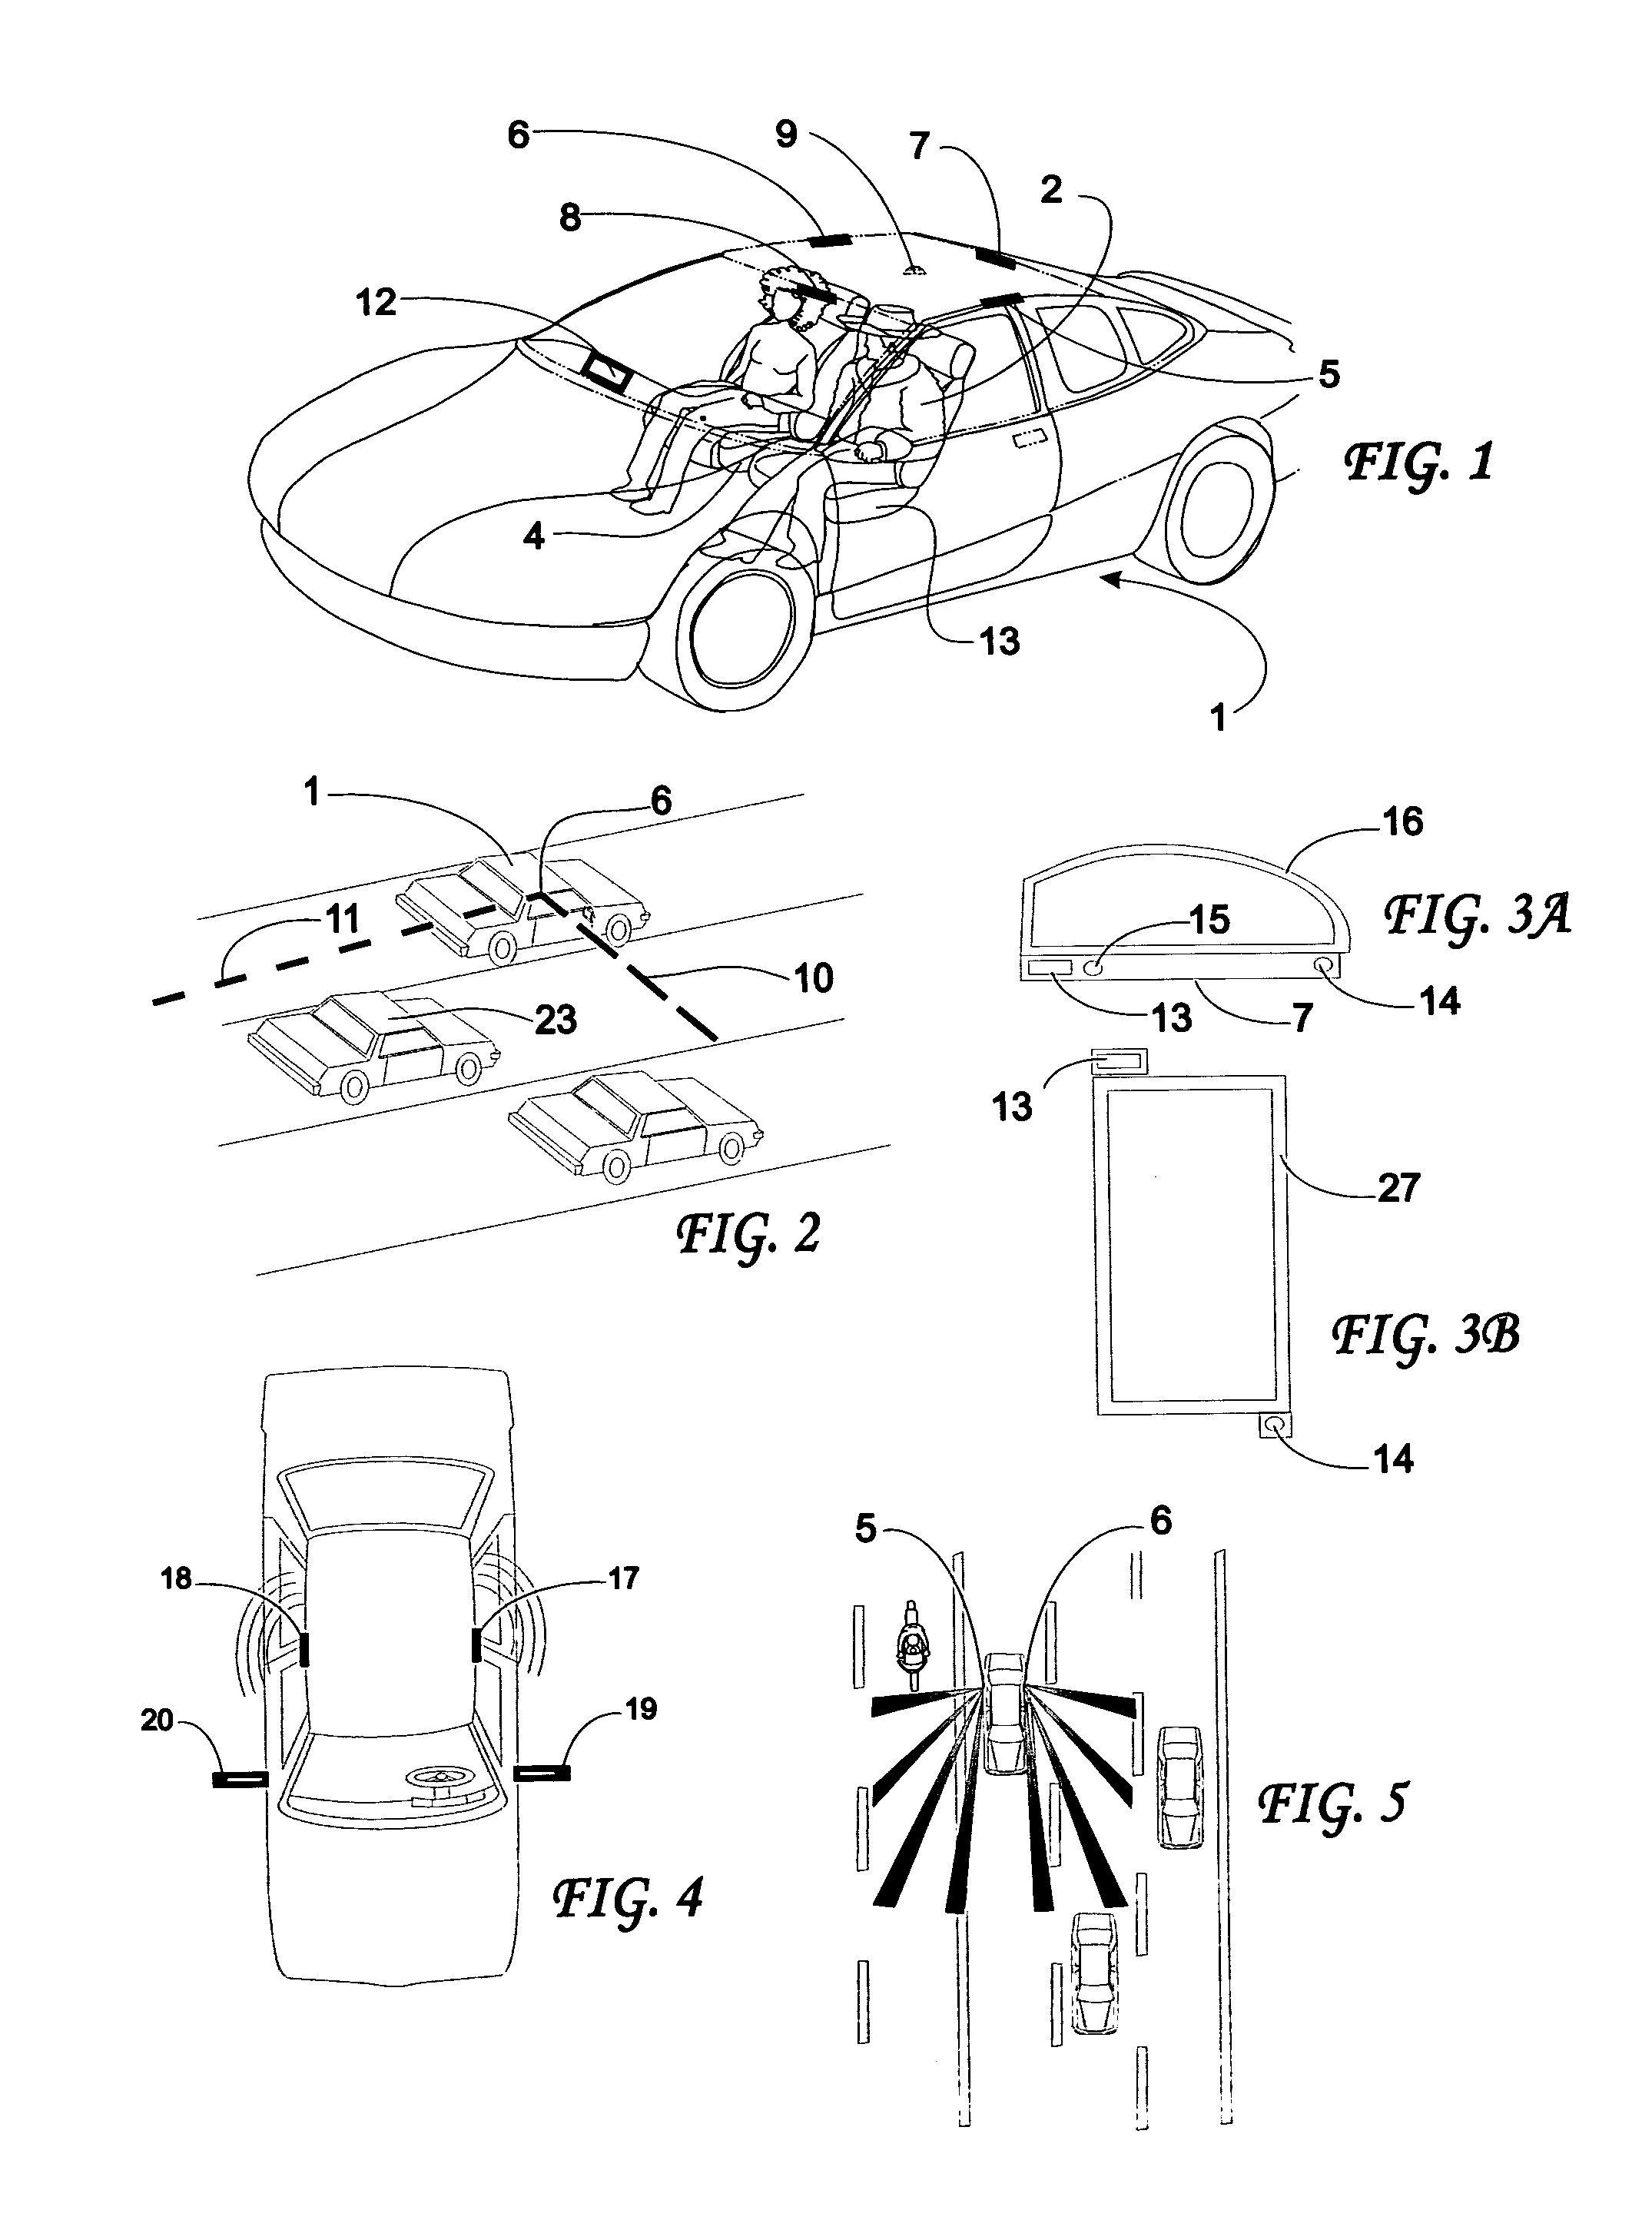 Method for obtaining and displaying information about objects in a vehicular blind spot